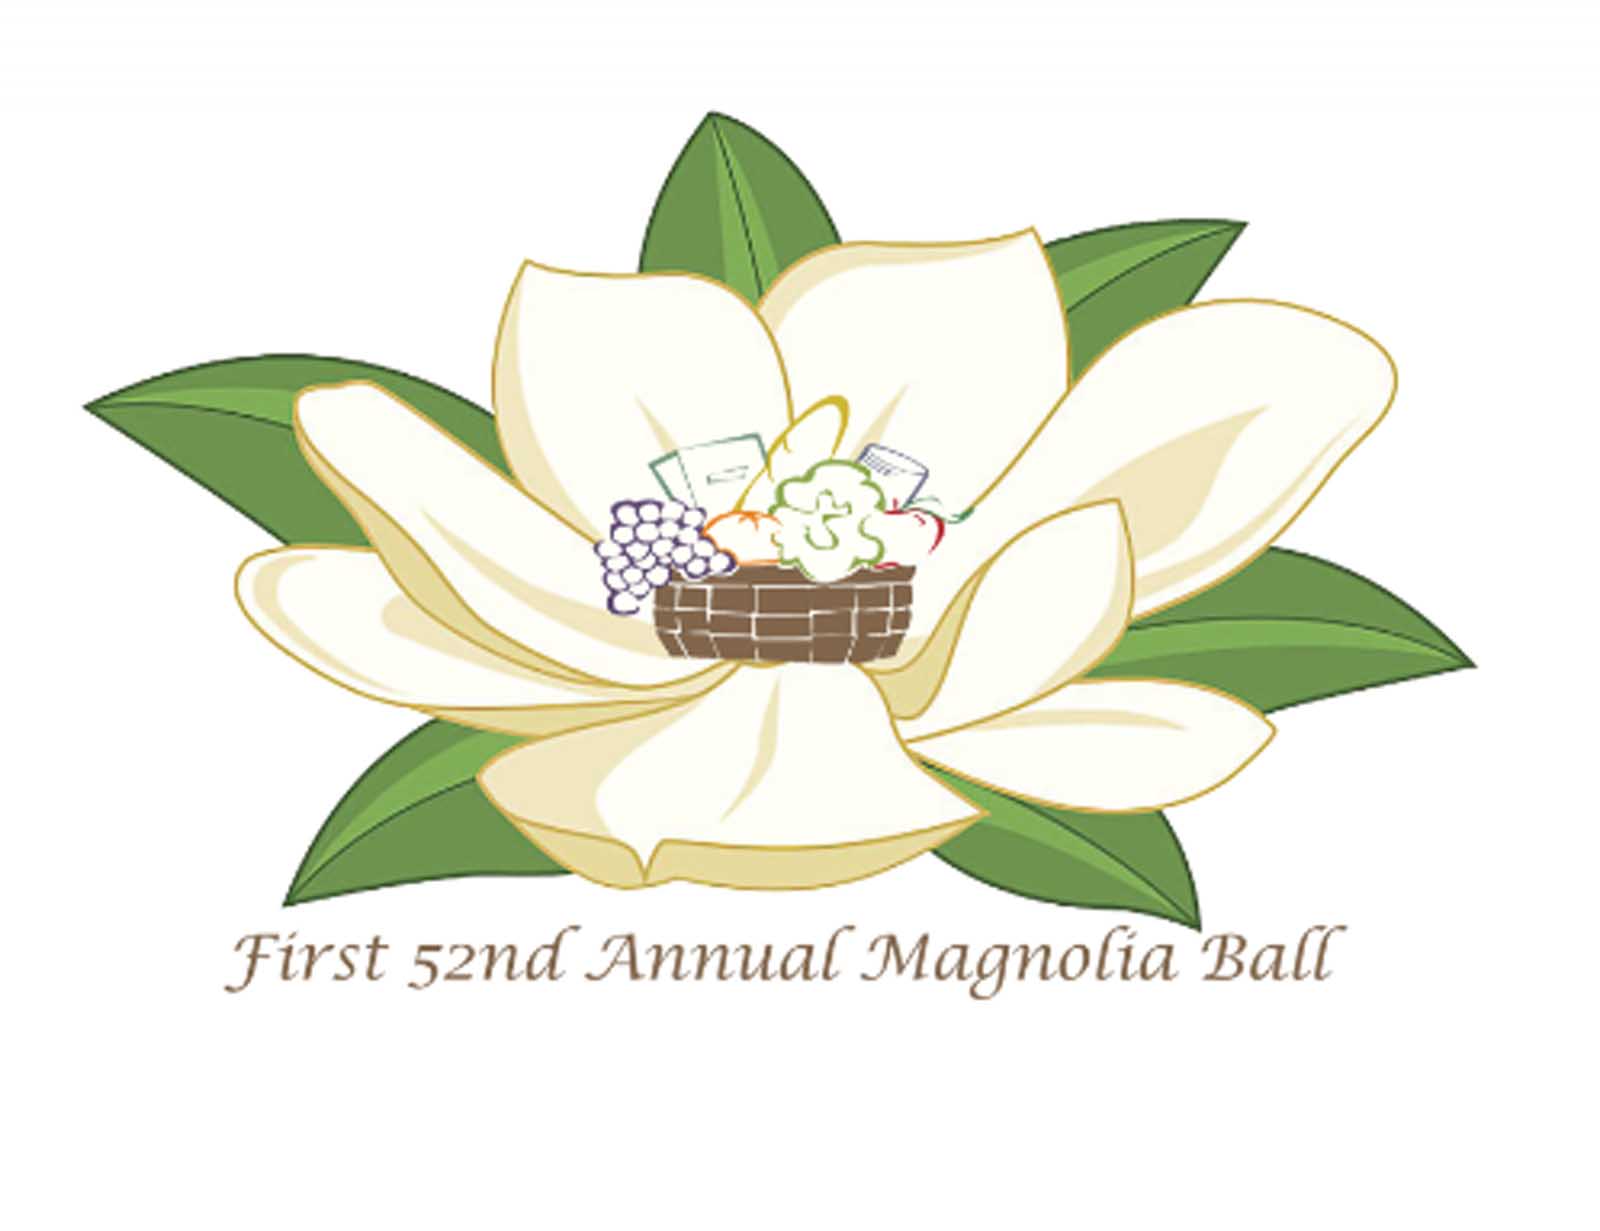 Prodisee Pantry Hosting Magnolia Ball In January